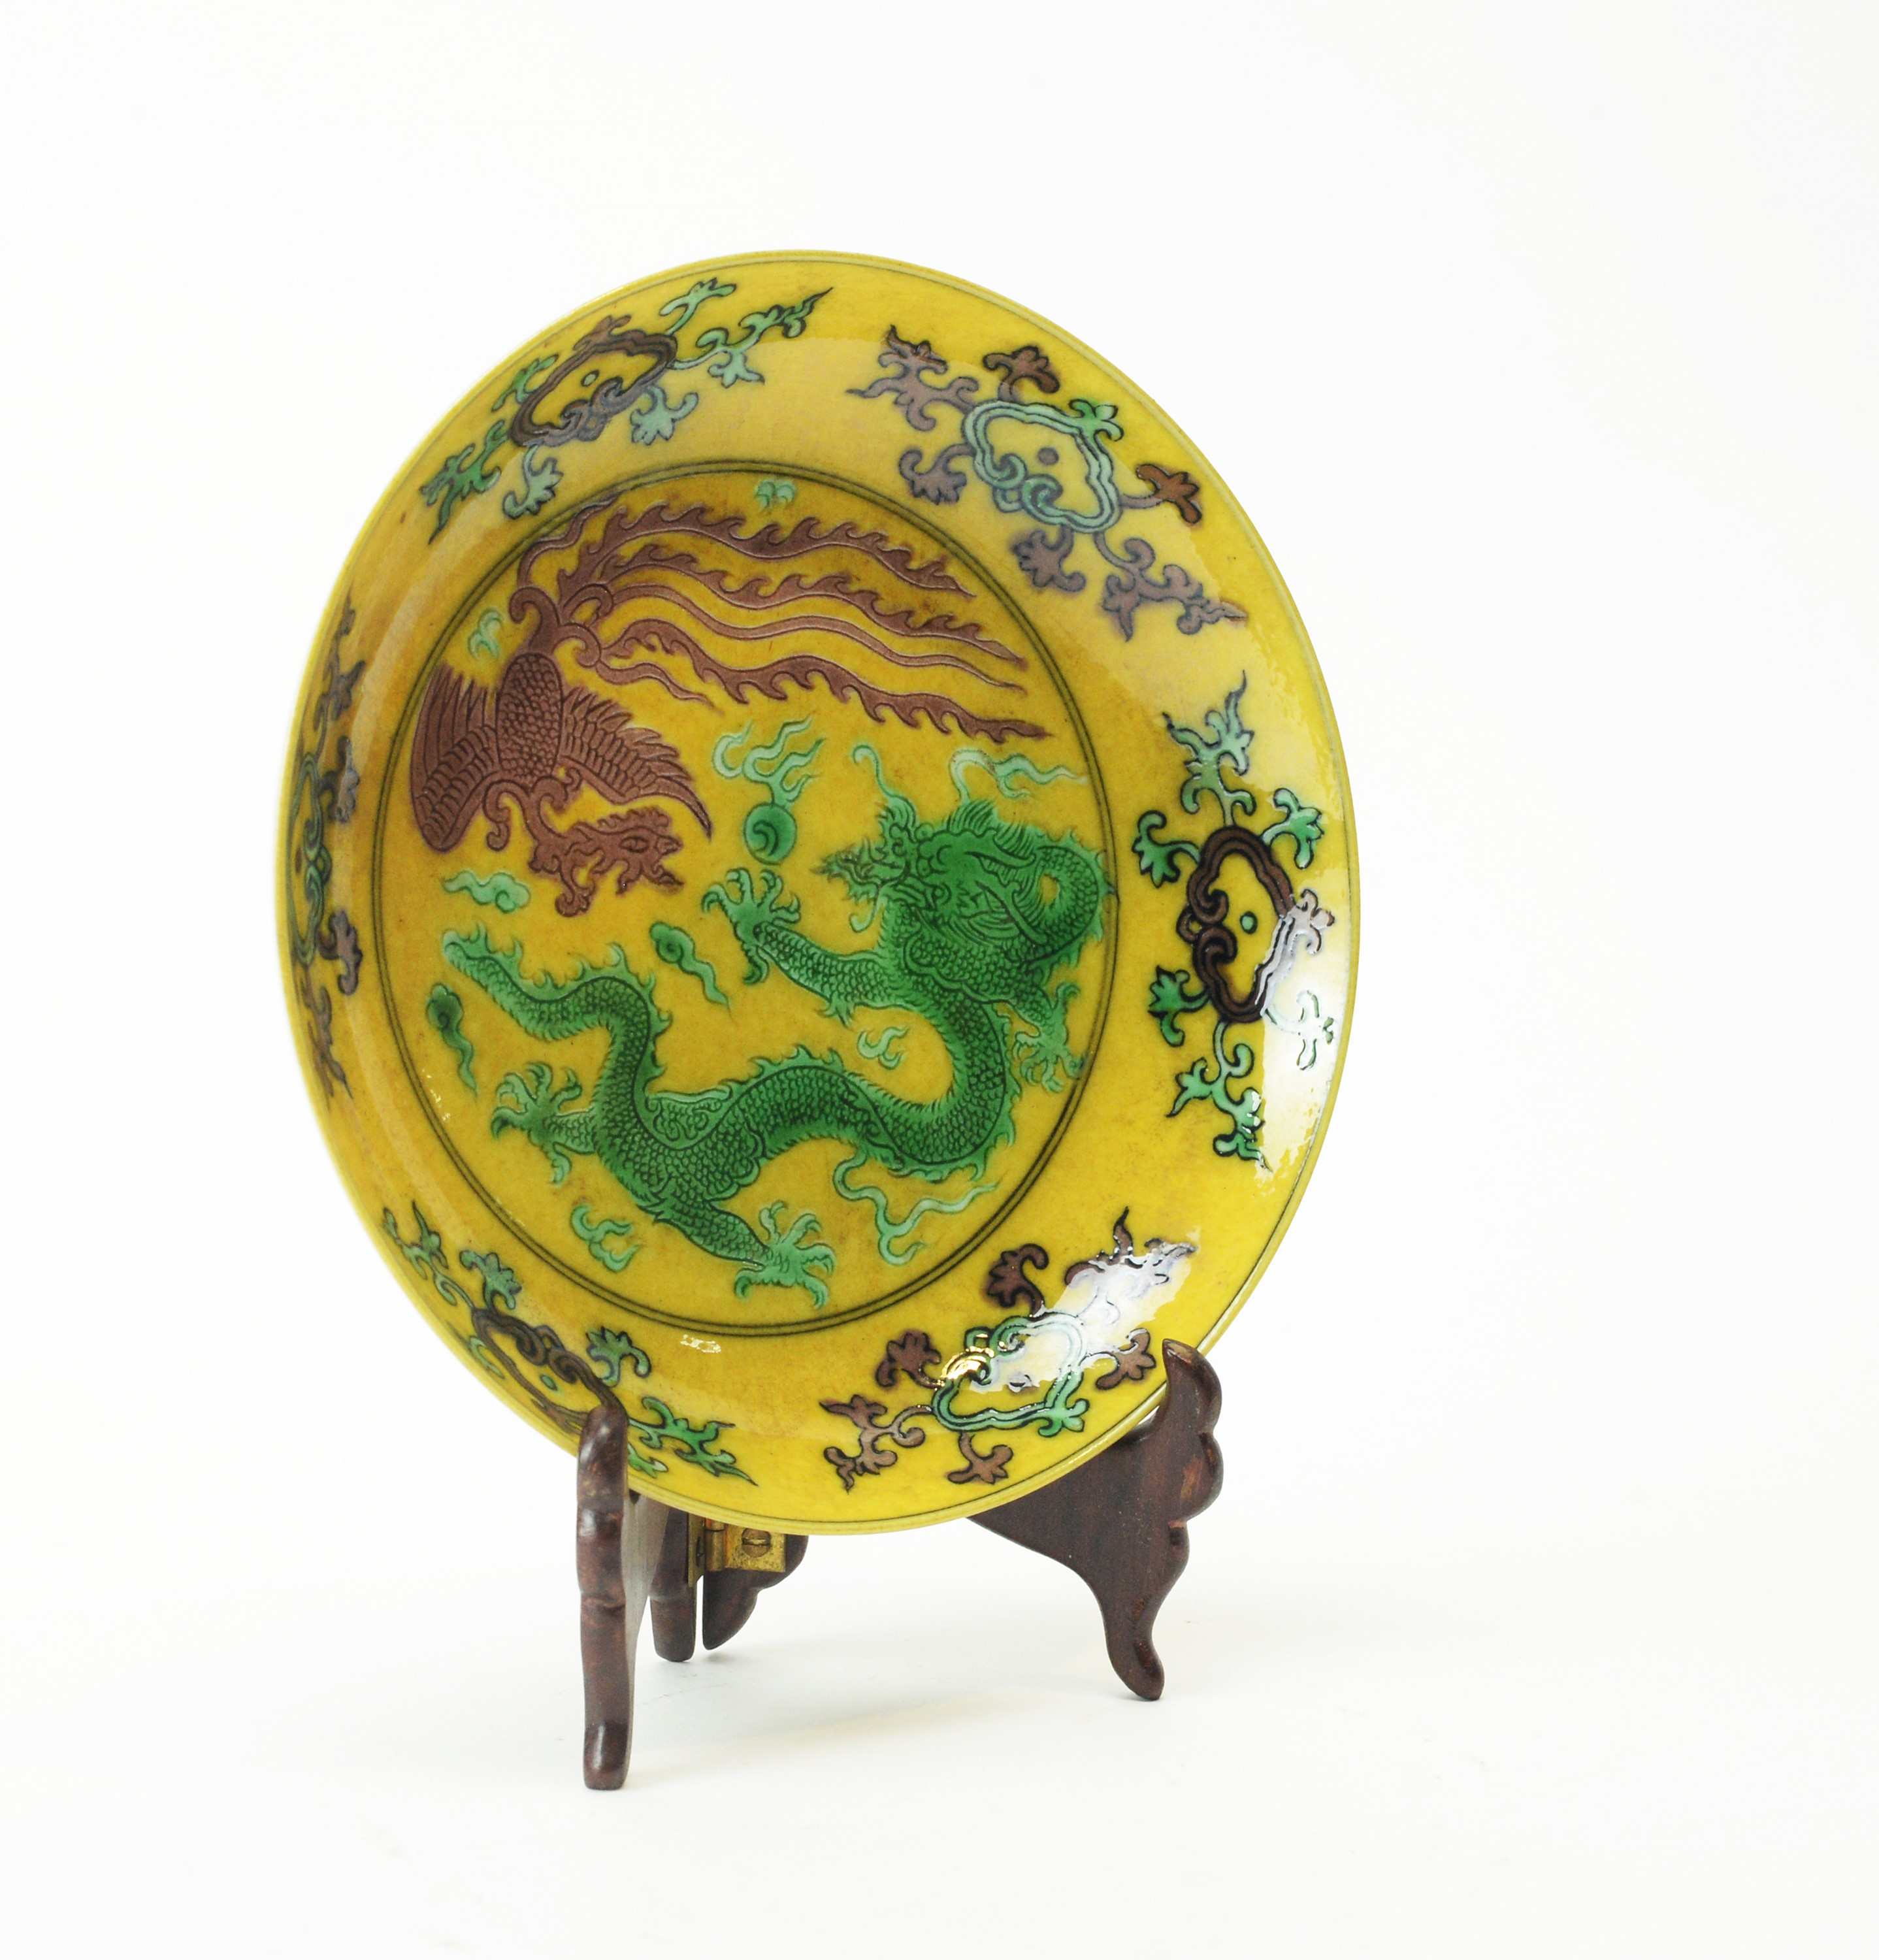 Chinese 'biscuit' saucer dish - Image 2 of 2